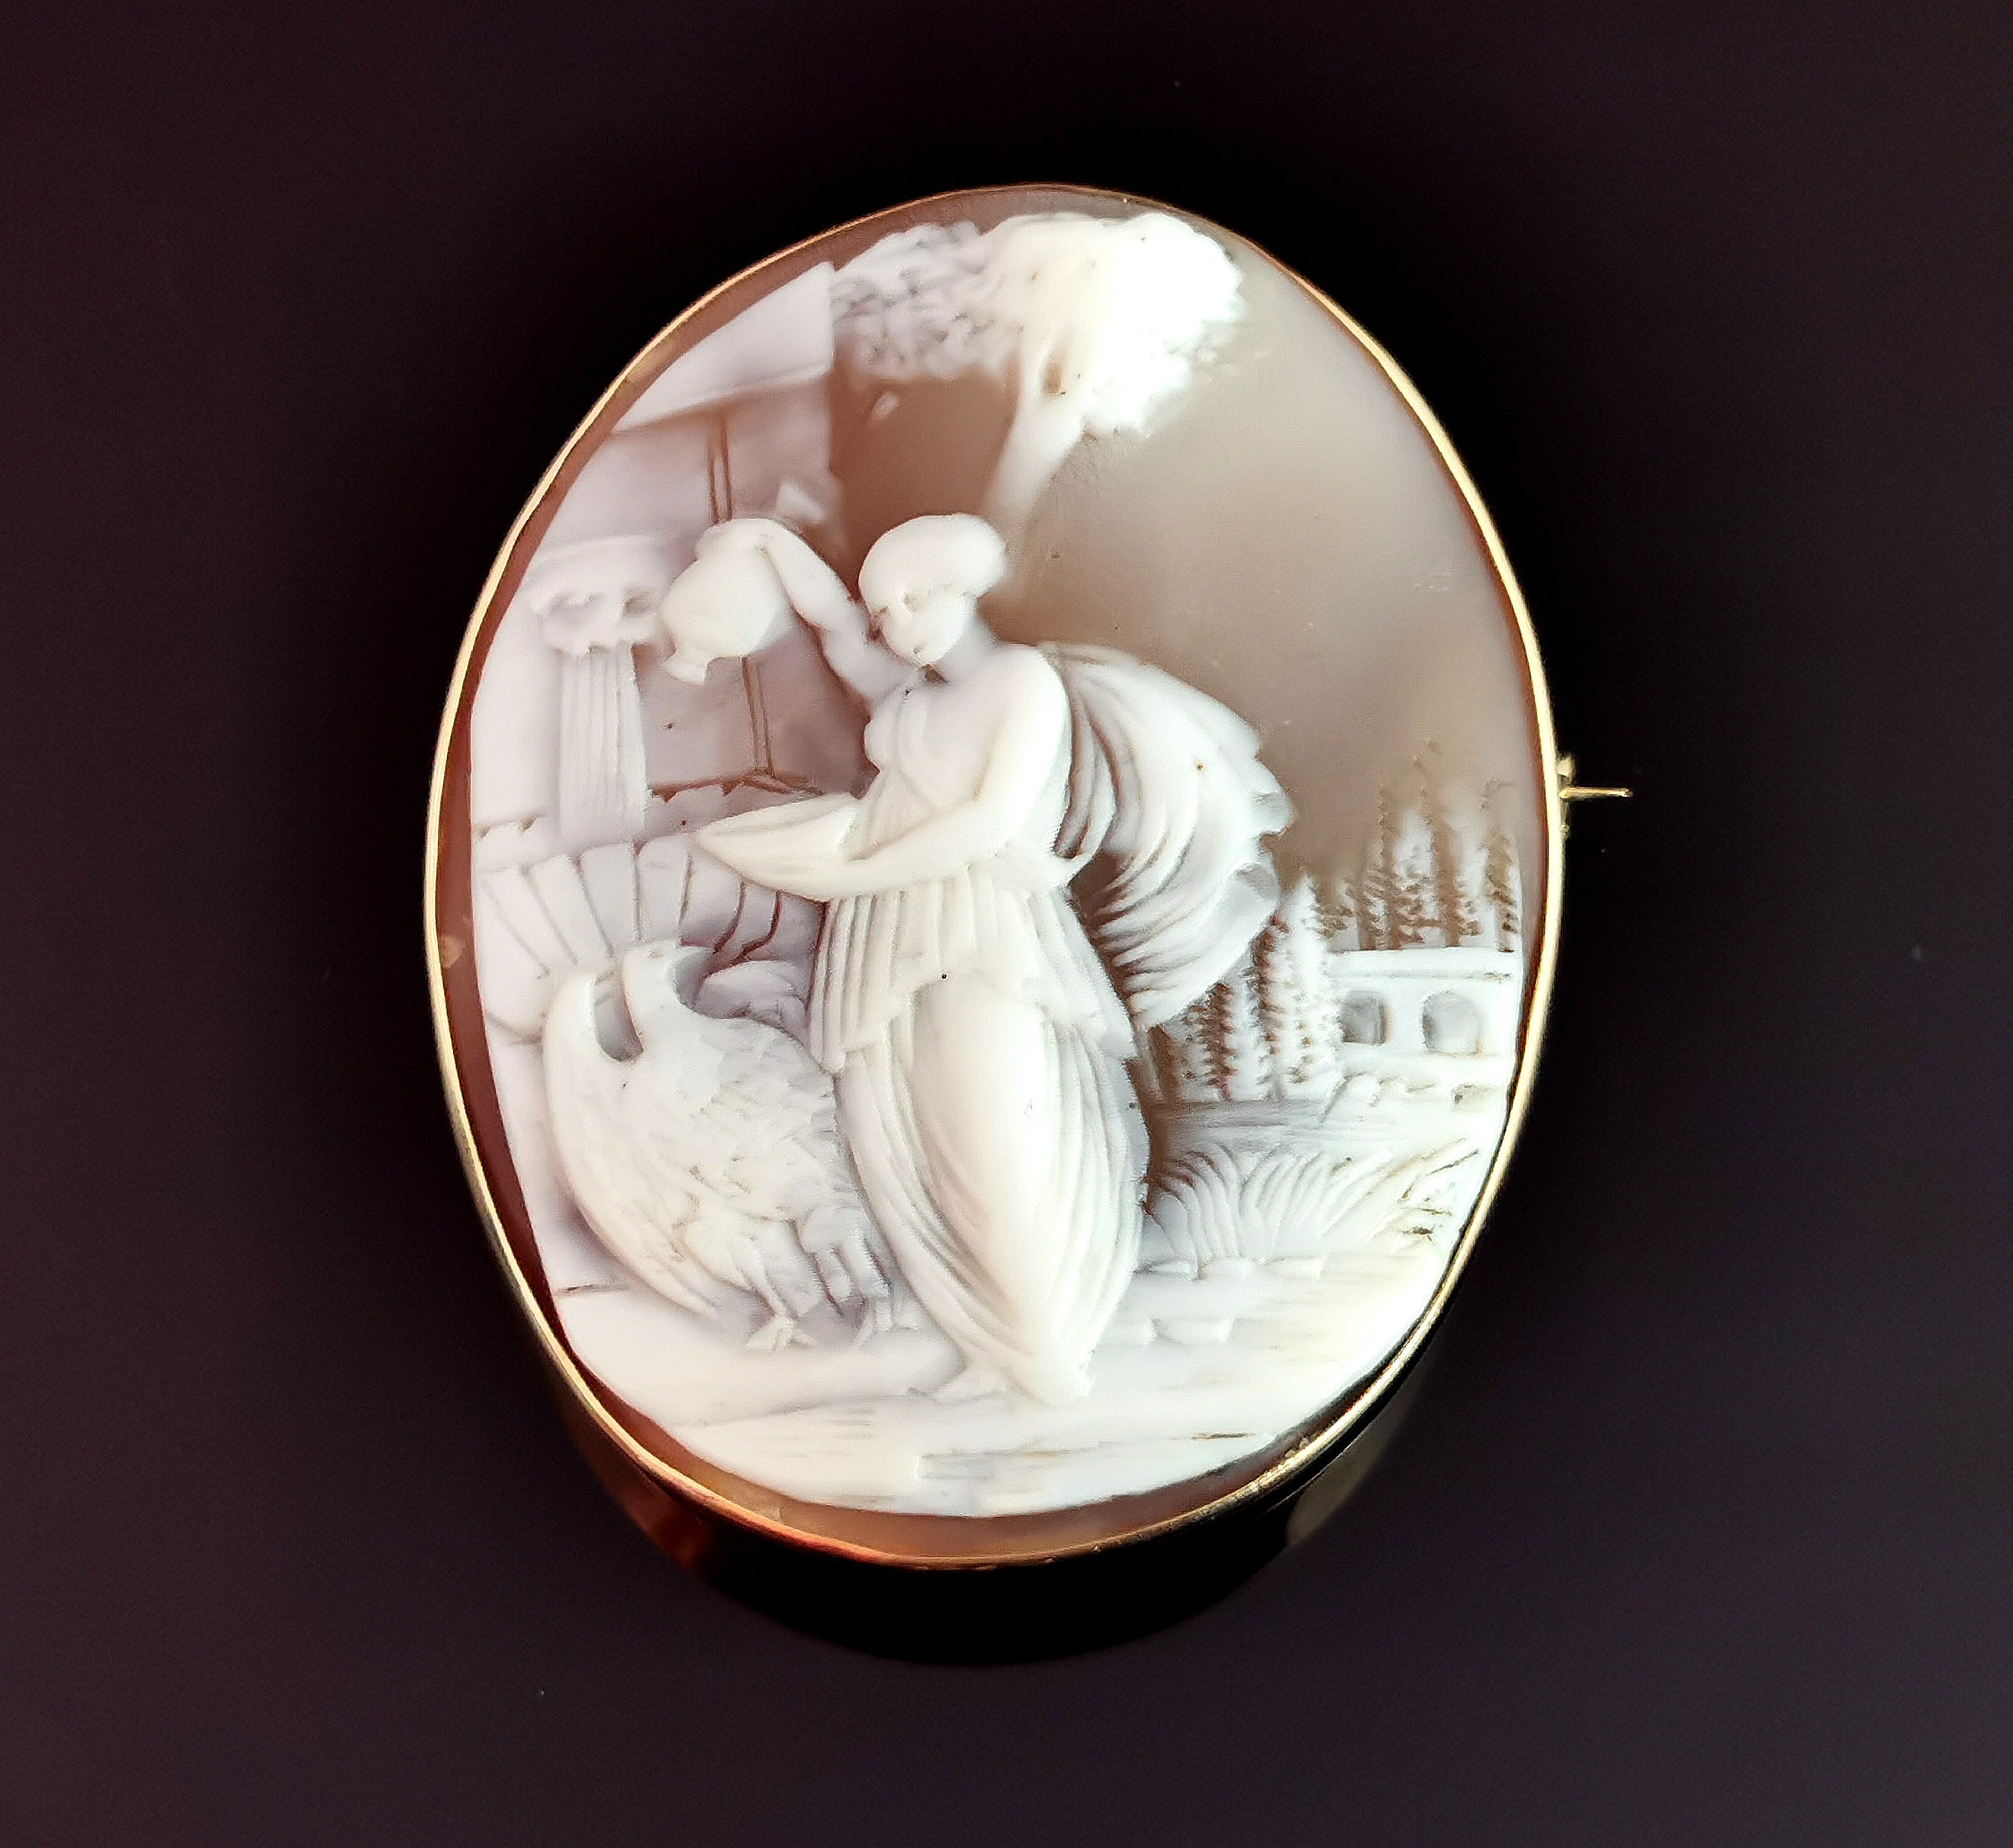 An attractive antique Edwardian era 9kt gold cameo brooch.

A finely carved bullmouth shell cameo depicting Hebe feeding nectar to the eagle, housed in a later 9kt yellow gold frame.

An unusual subject matter, it is always a pleasure to find